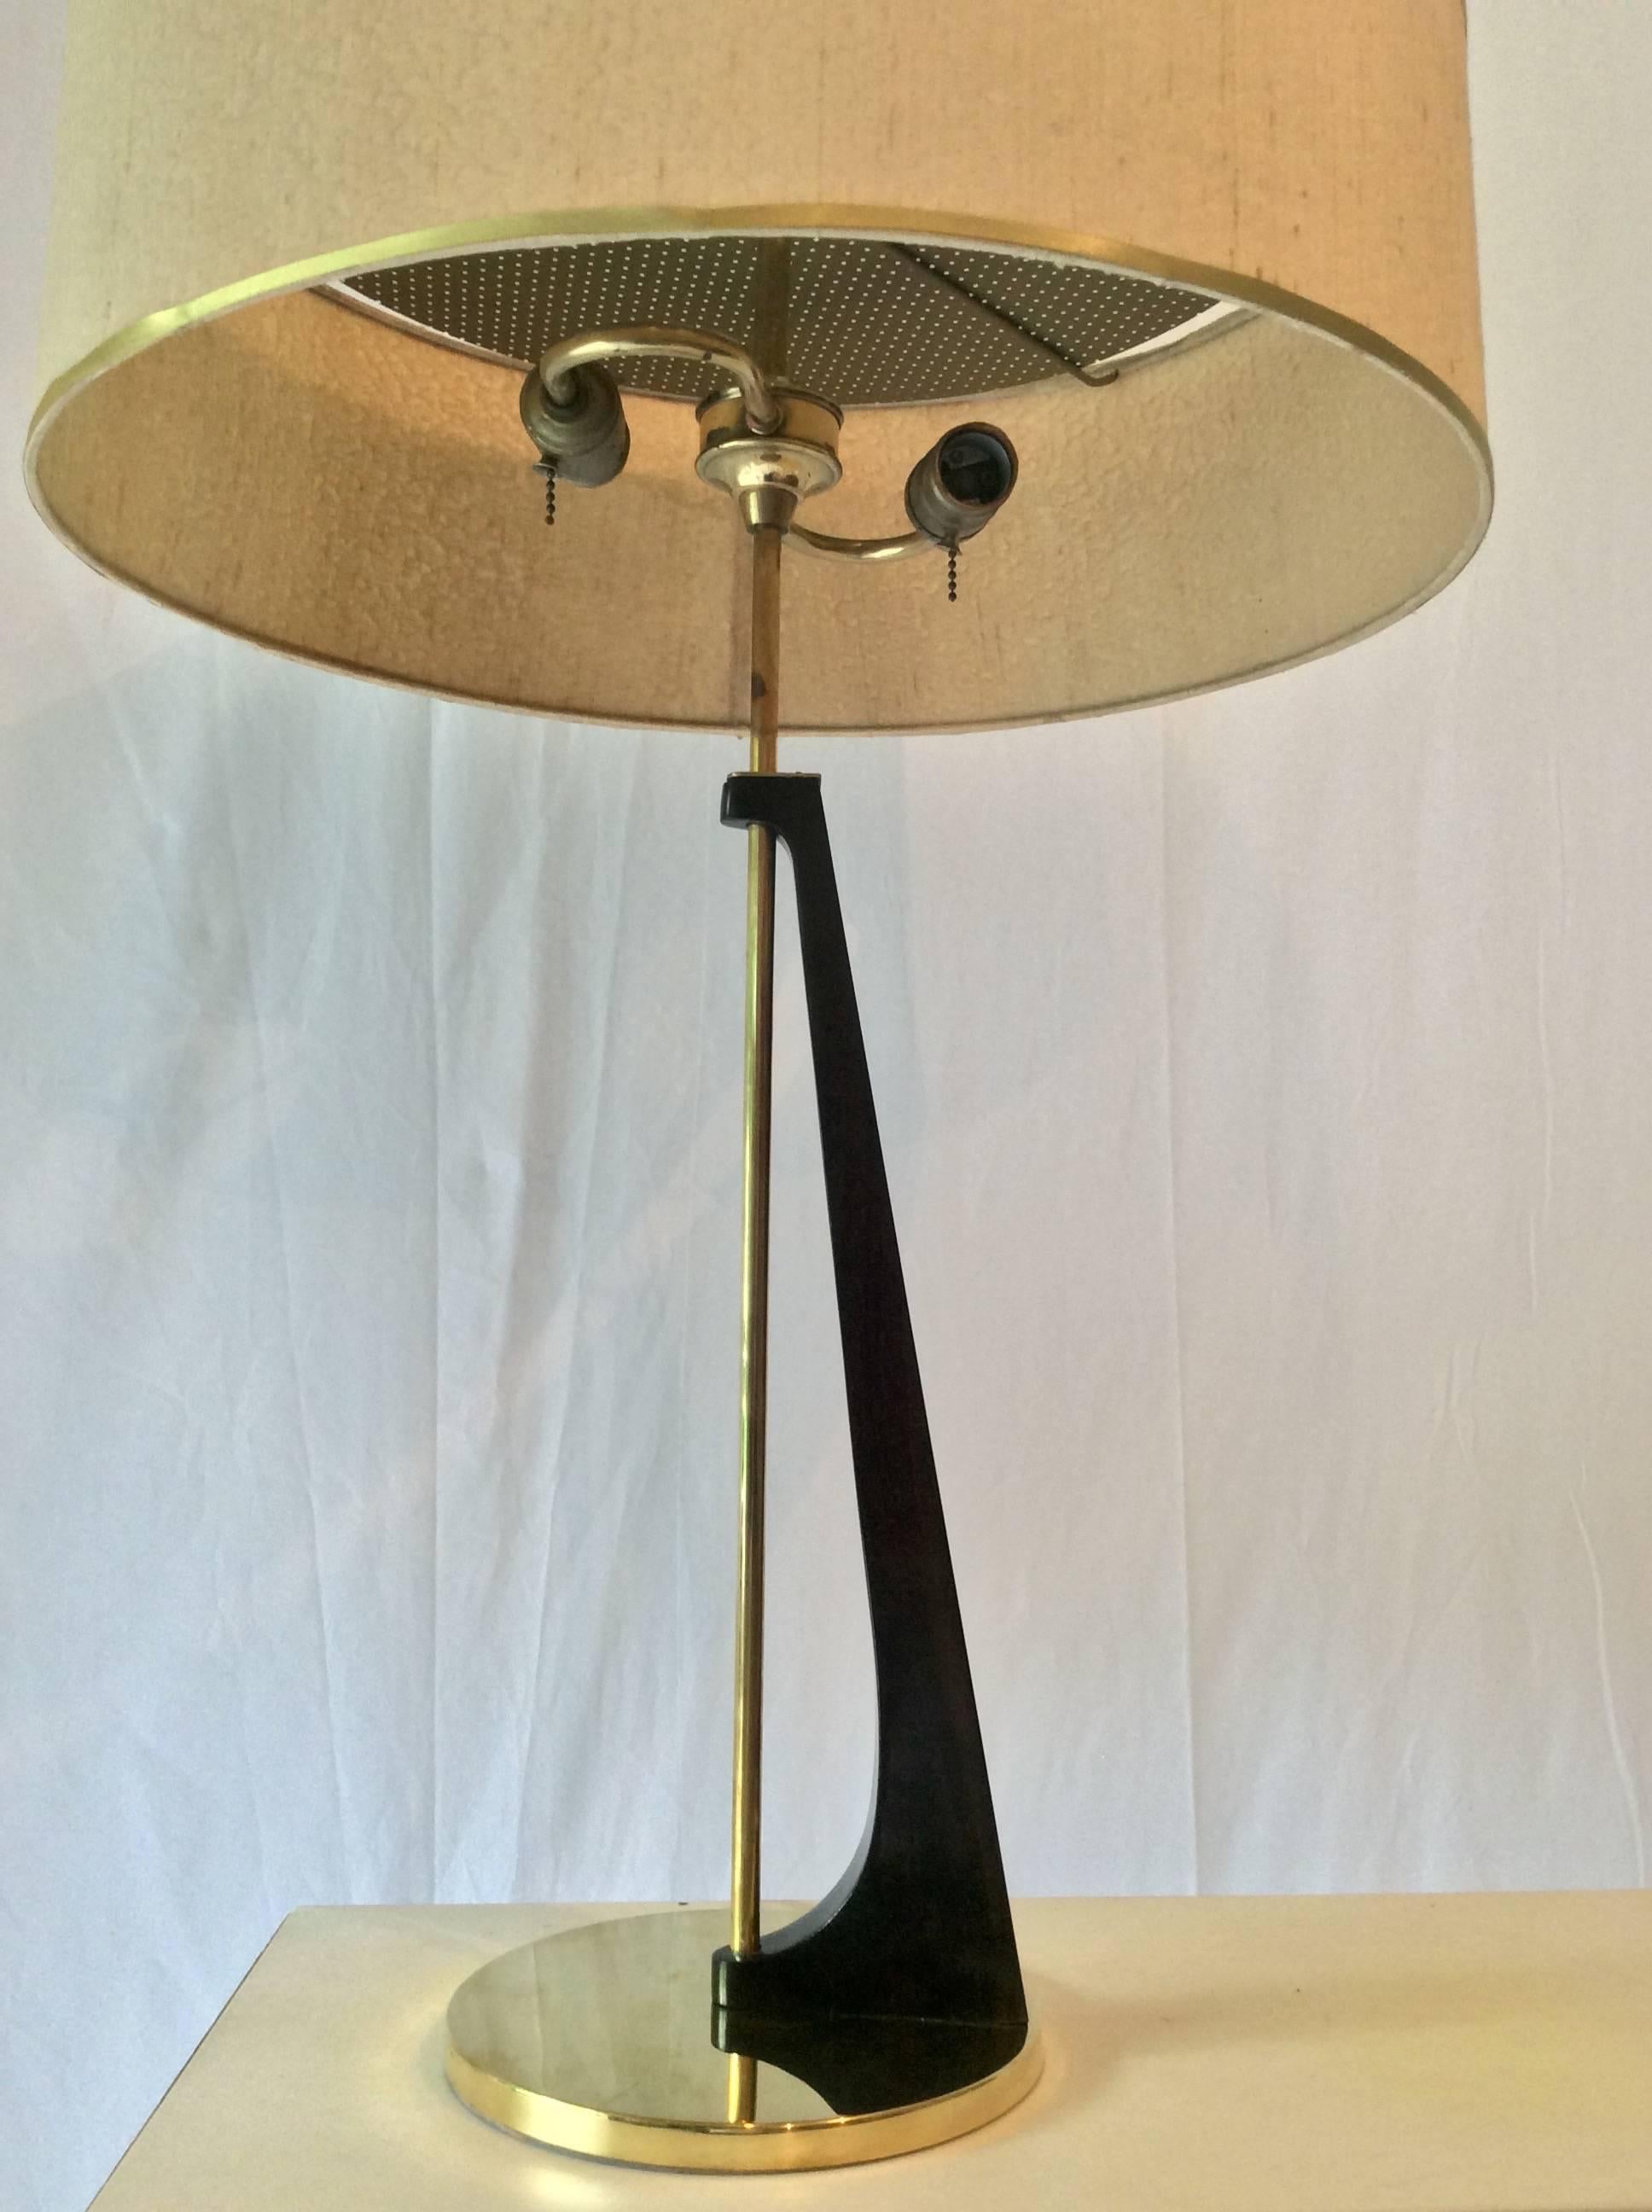 Brass Mid-Century Modern Table Lamps in Sculptural Wood Form, circa 1950